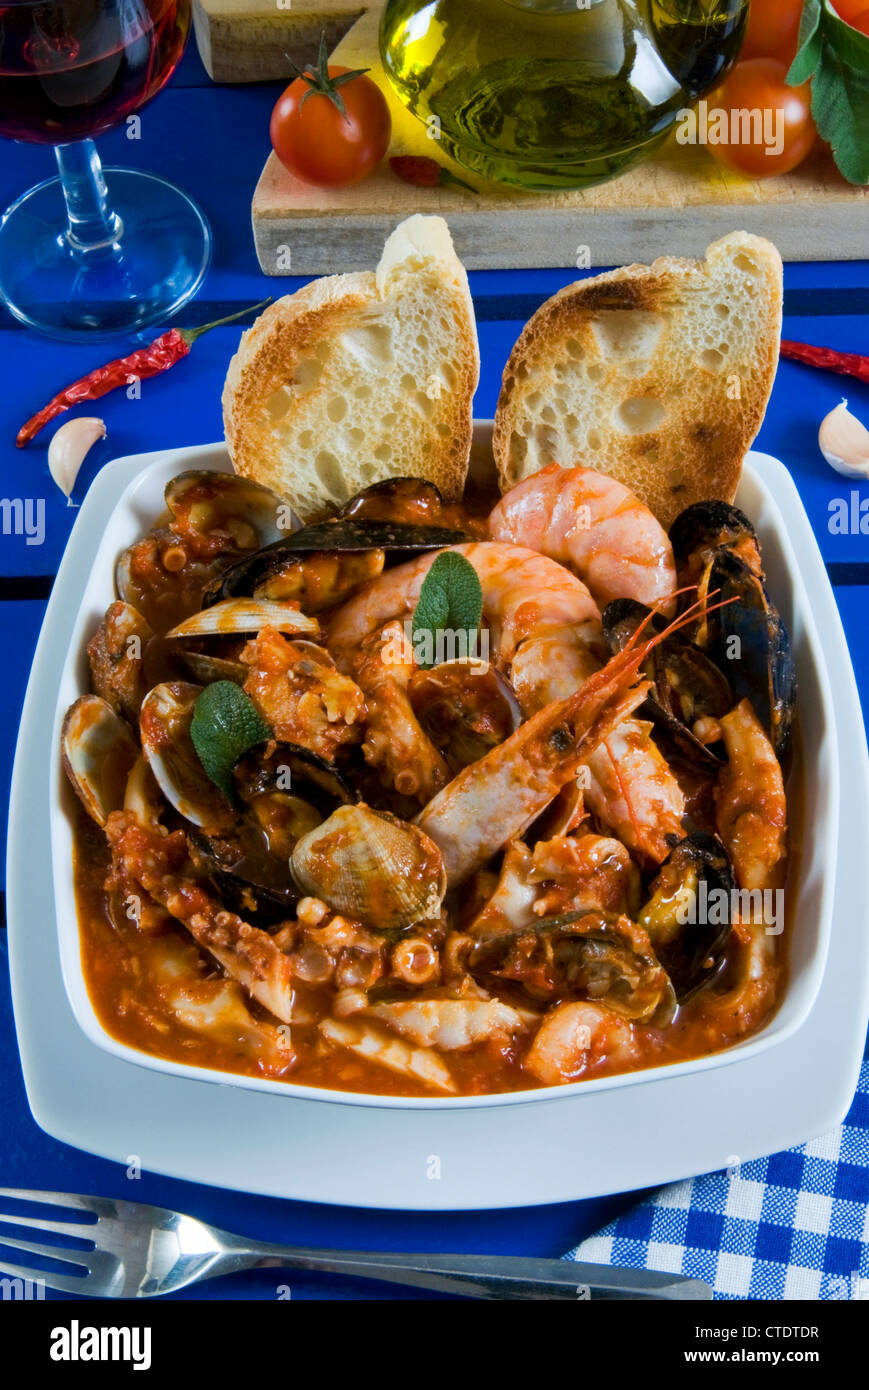 Cacciucco, Italian fish stew consisting of several different types of ...